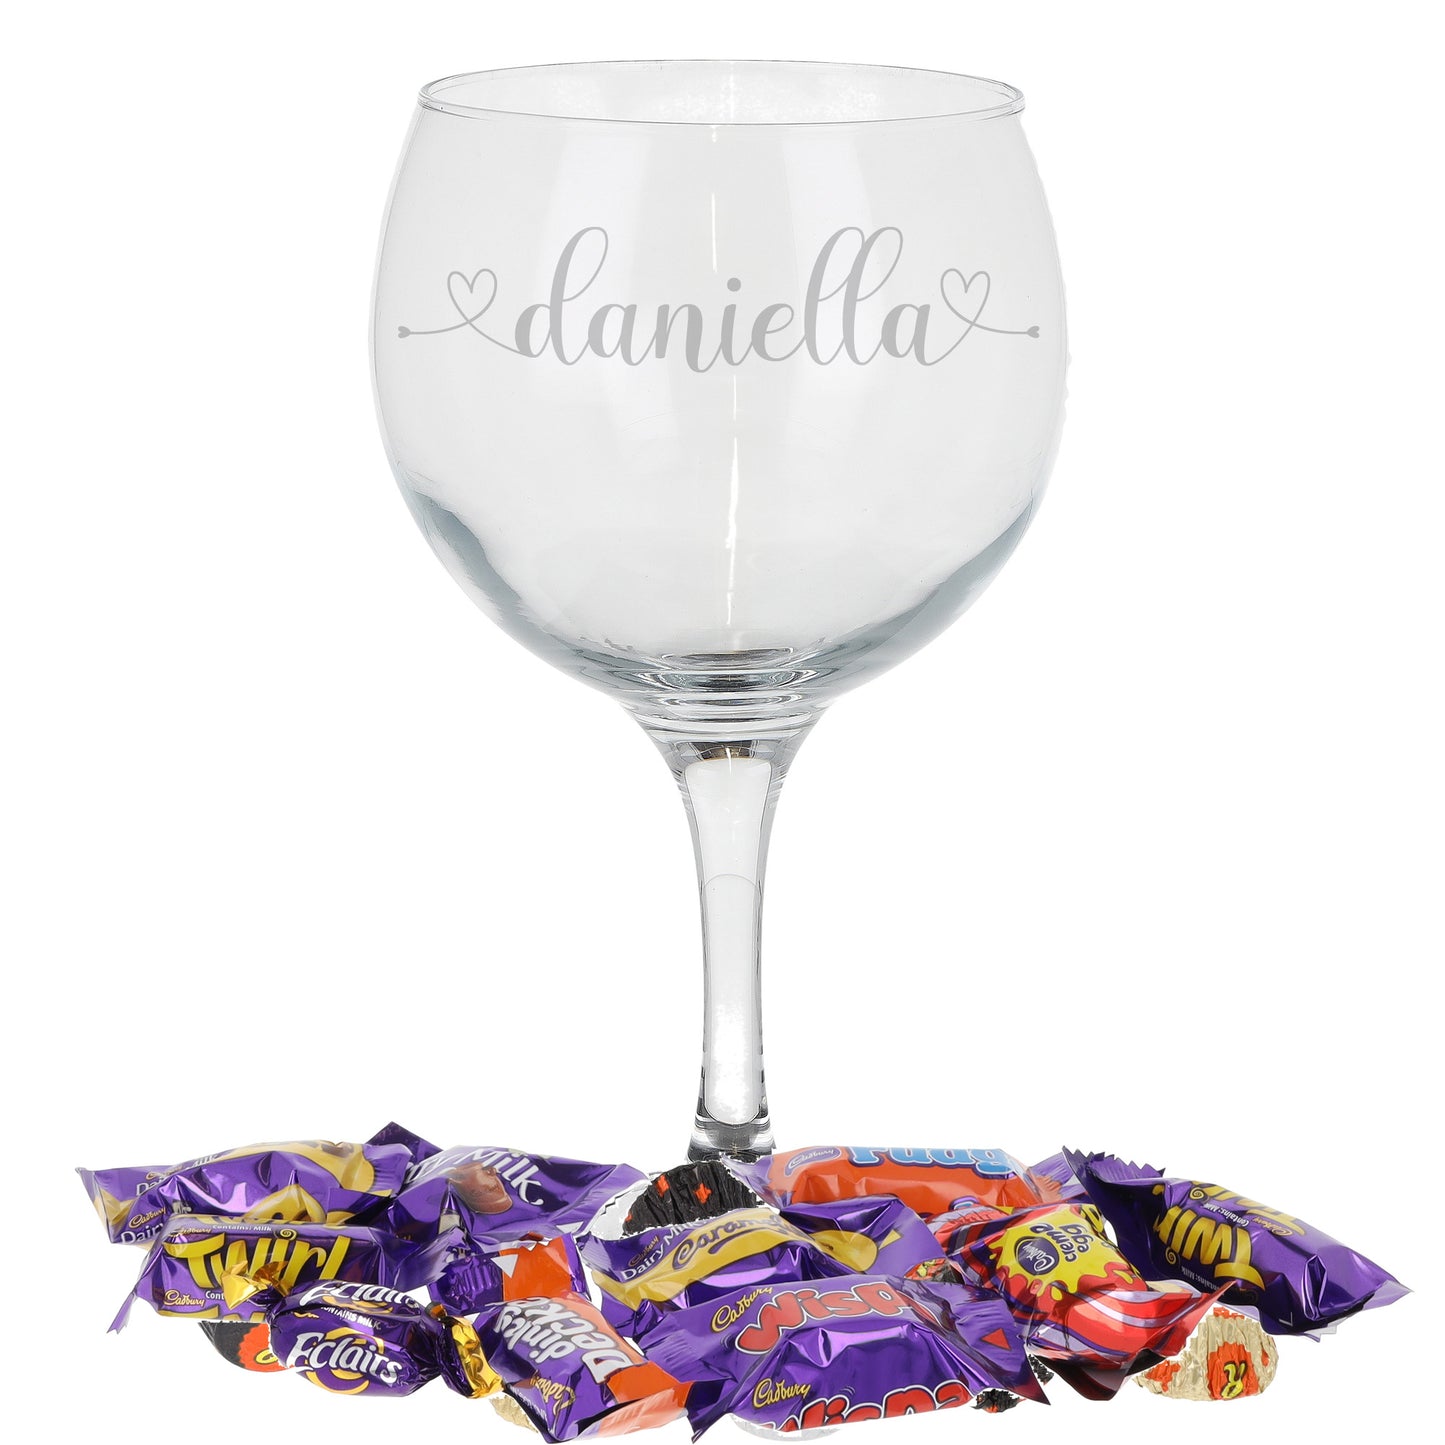 Engraved Personalised Balloon Gin Glass with Heart Design  - Always Looking Good -   